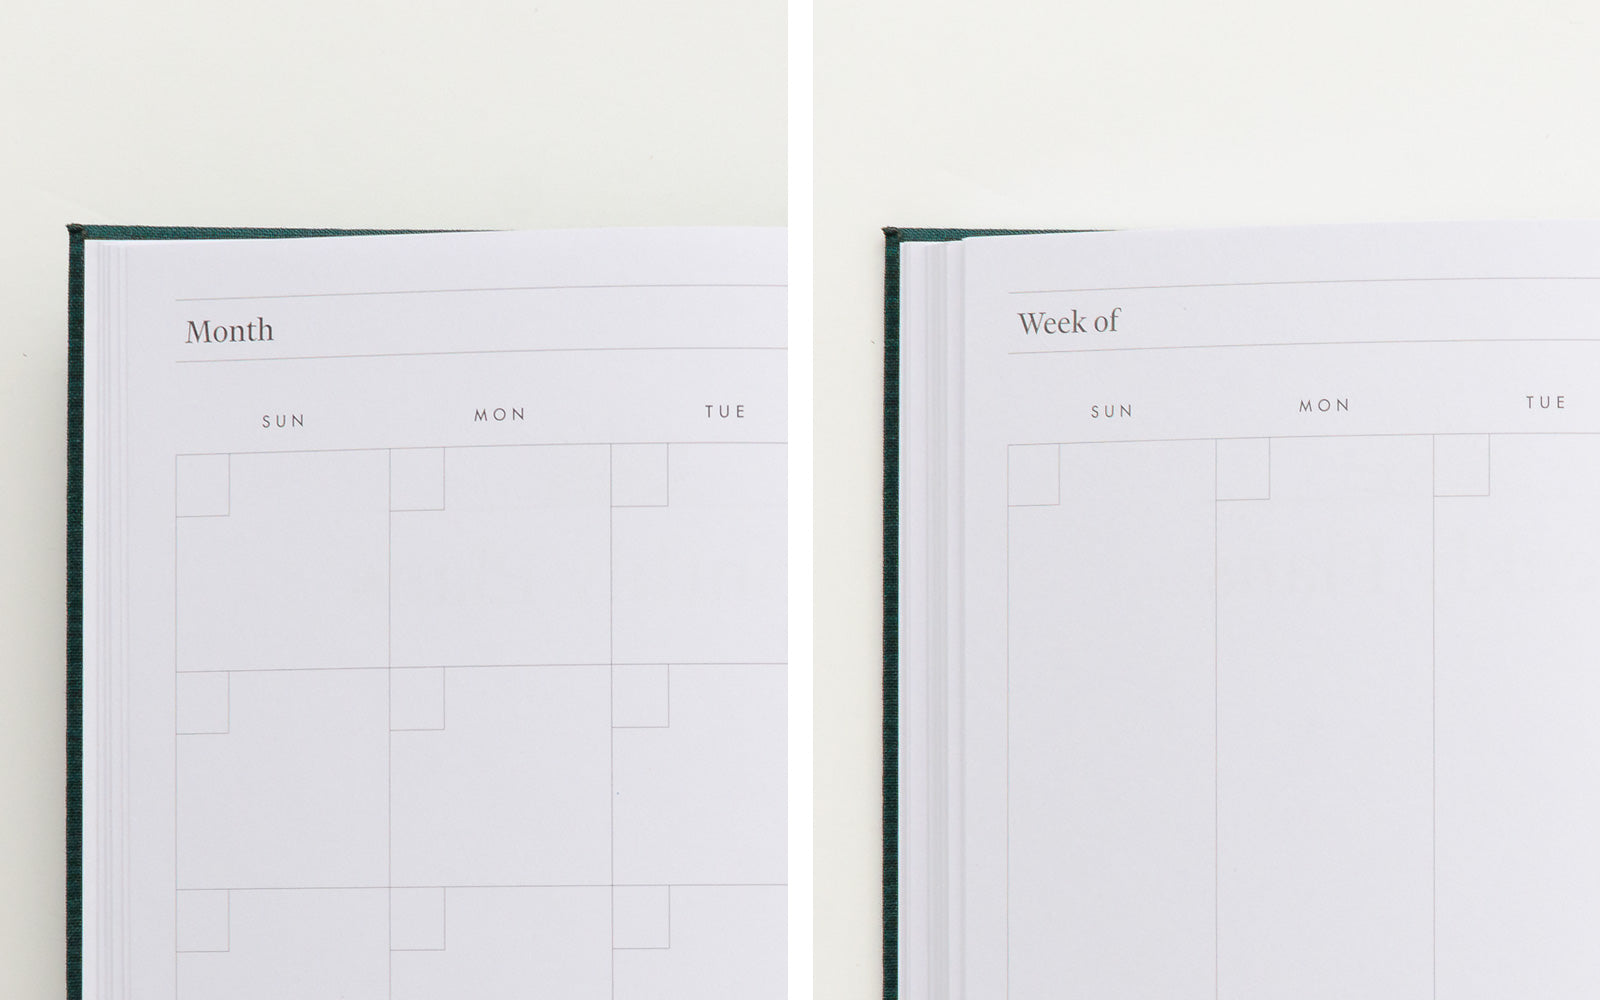 Undated monthly and weekly plans